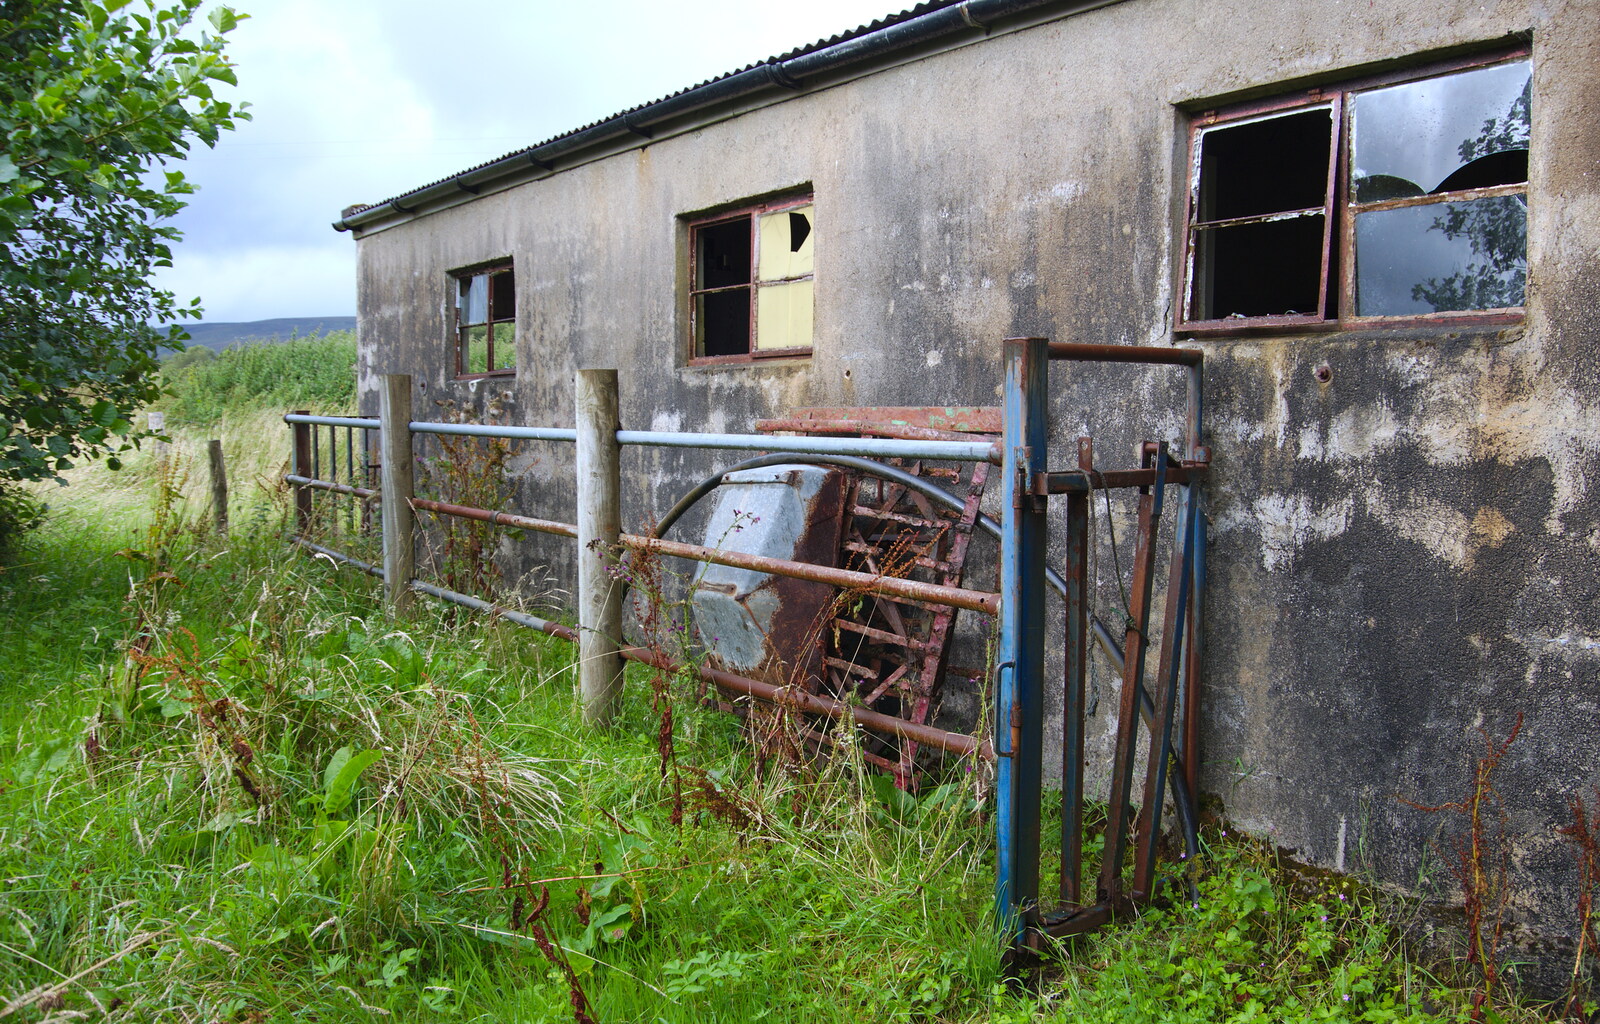 Outside the old shed from Glencar Waterfall and Parke's Castle, Kilmore, Leitrim, Ireland - 18th August 2019